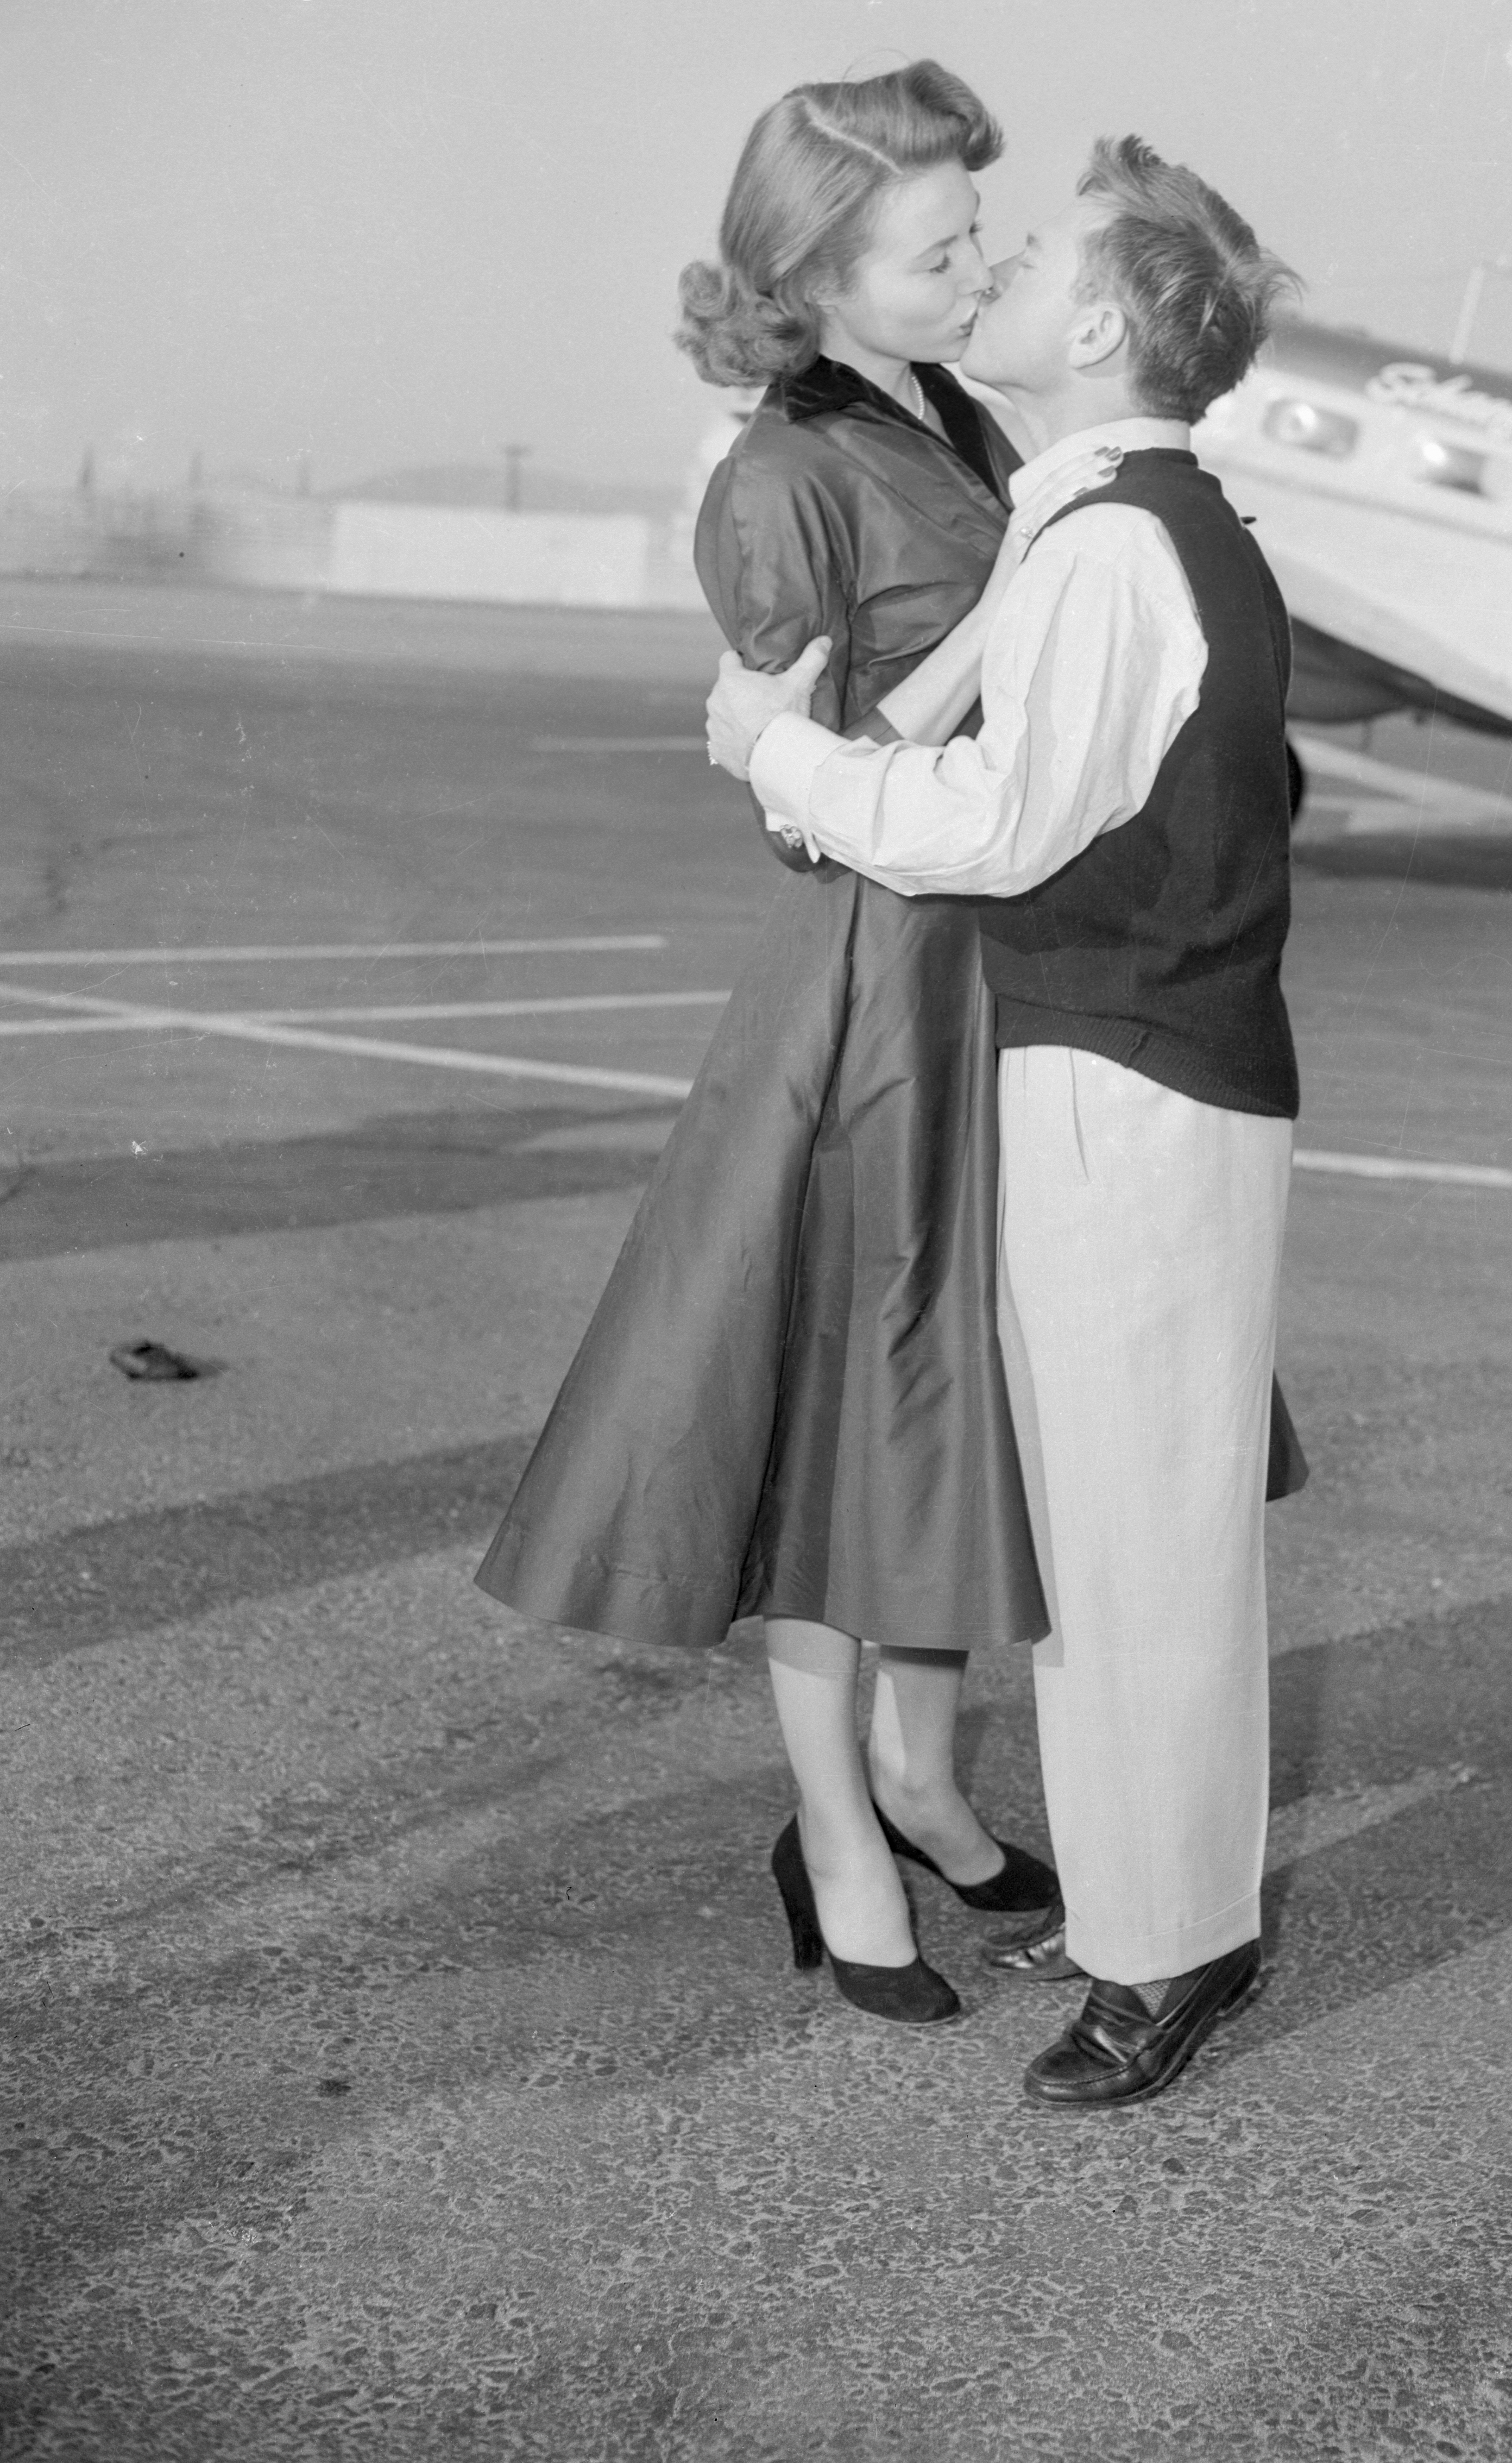 Mickey Rodney and Elaine Mahnken, in the Burbank, California, circa 1952. | Source: Getty Images